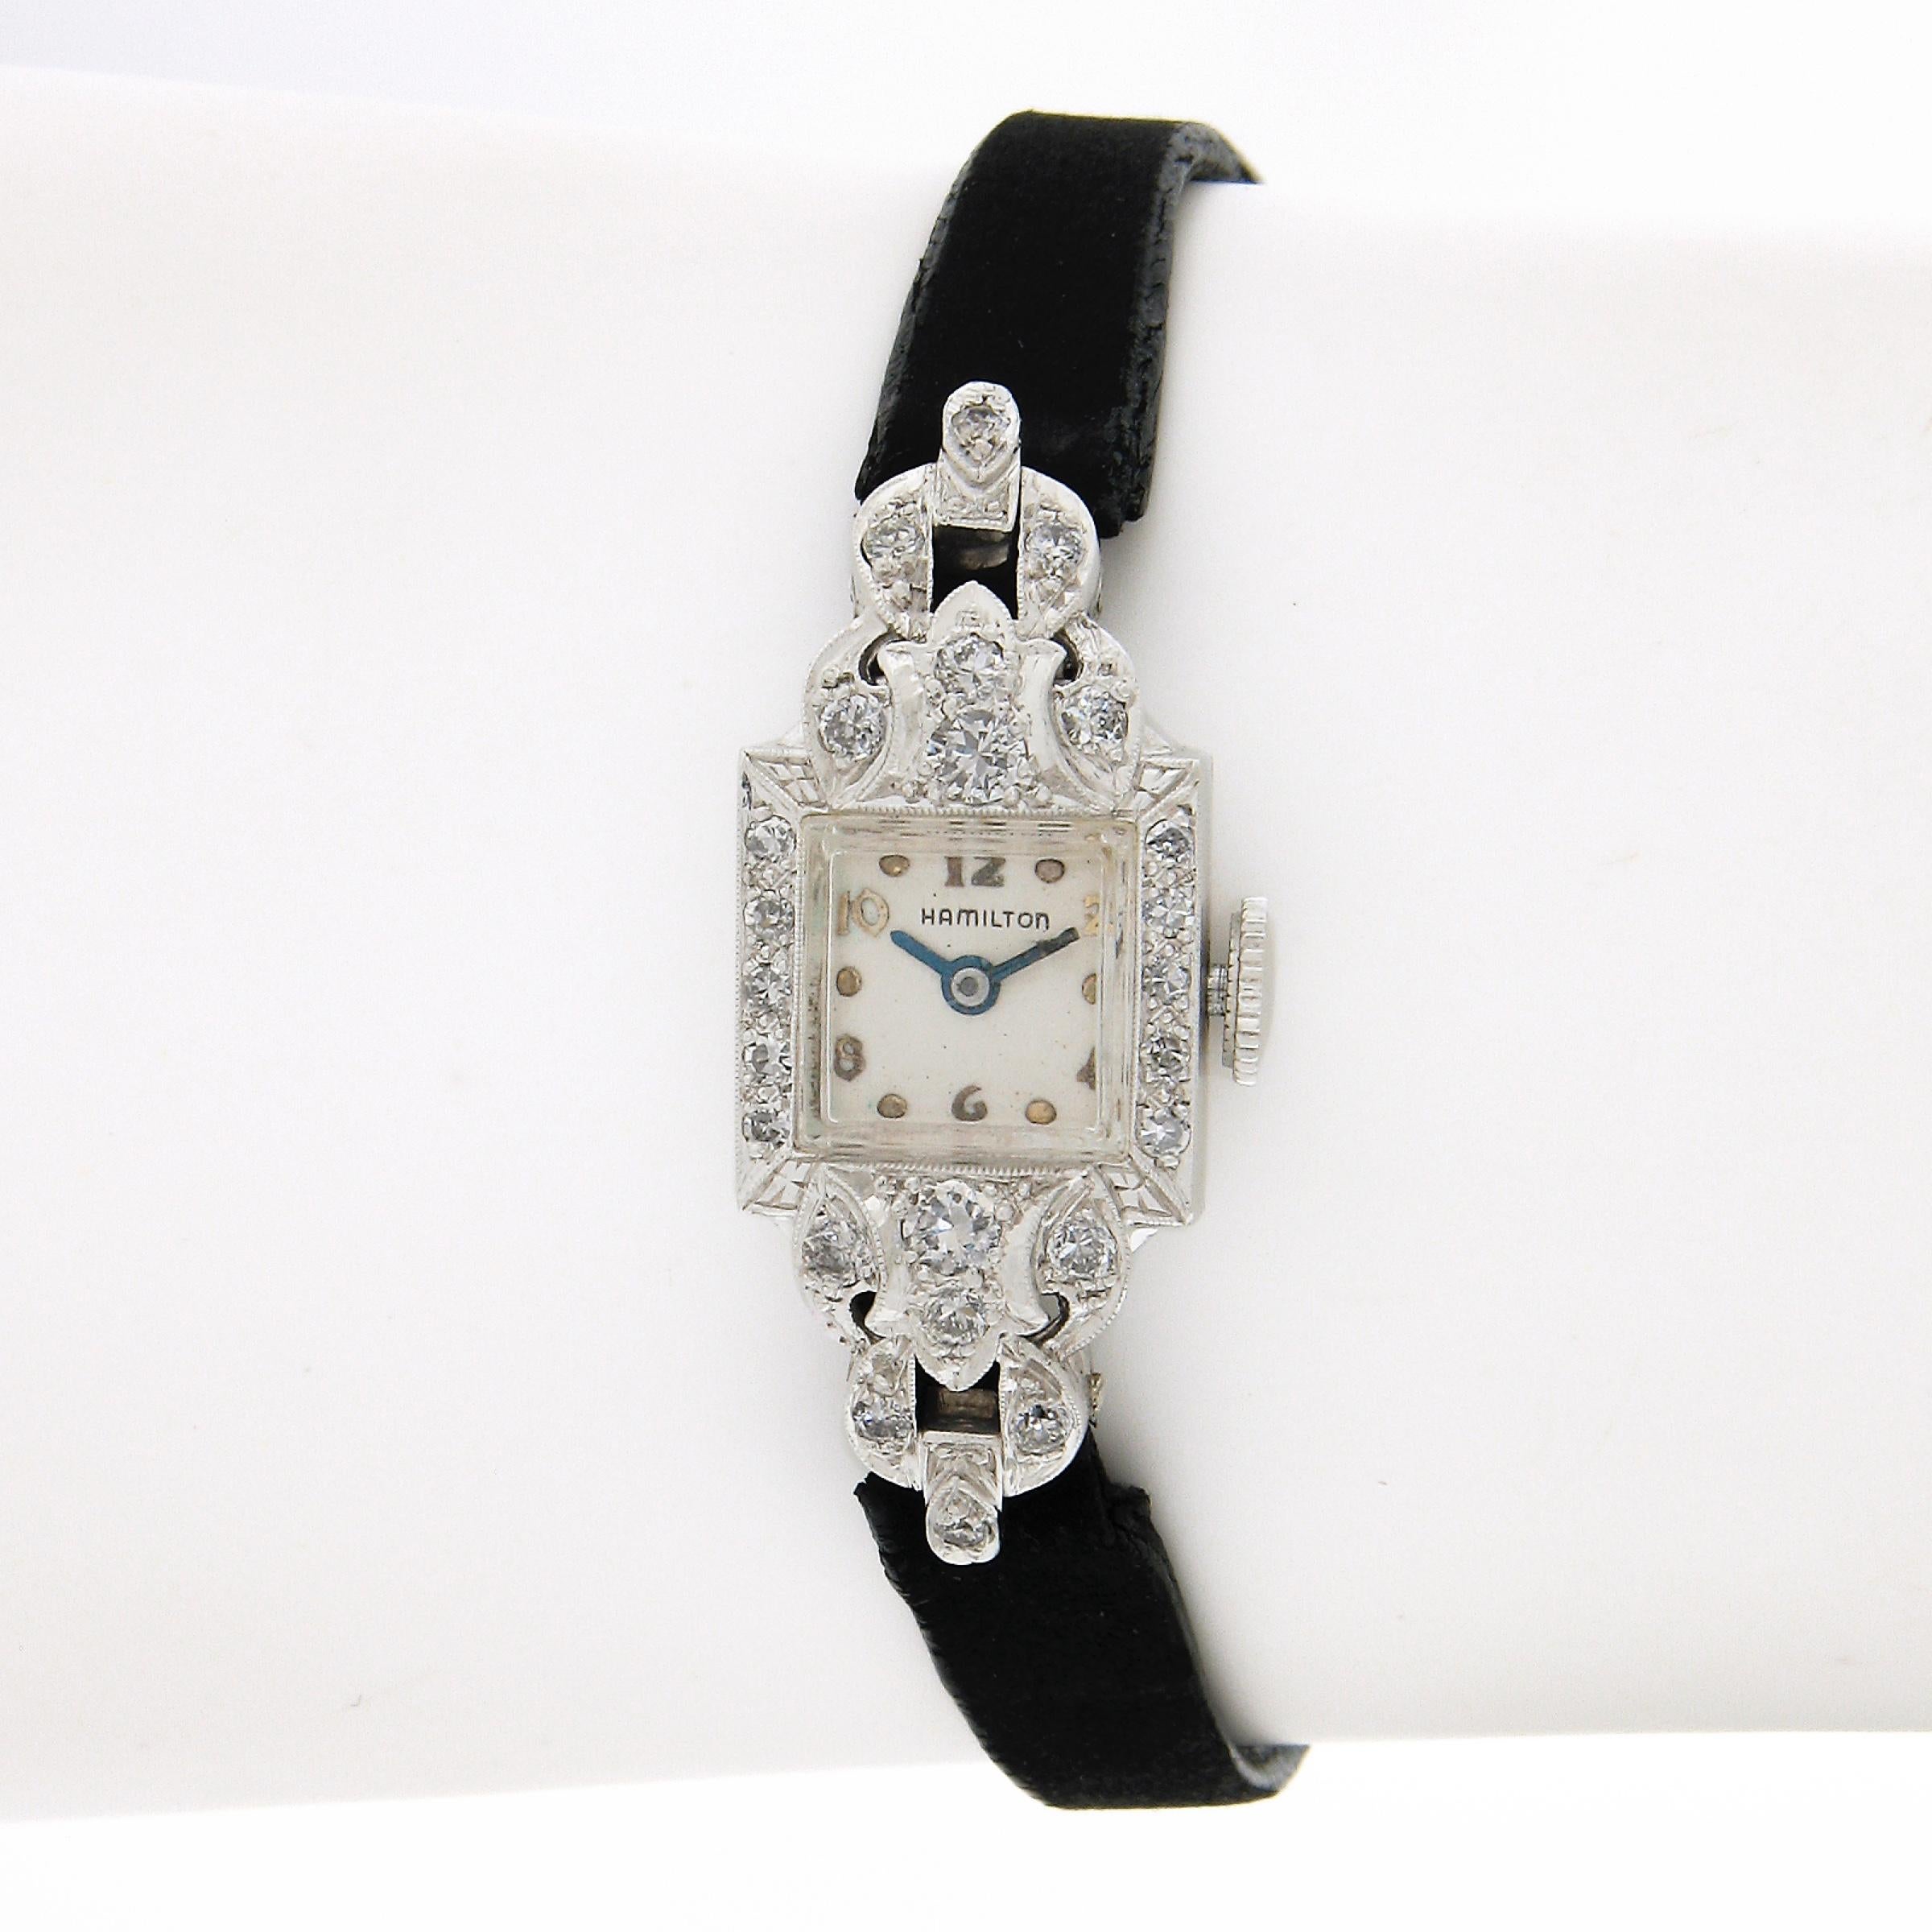 Here we have an elegant and classic vintage Hamilton ladies' watch mounted in a solid platinum case that is covered with approximately 0.45 carats of fine quality diamonds. The watch comes w/ a generic leather strap that shows some wear yet still in